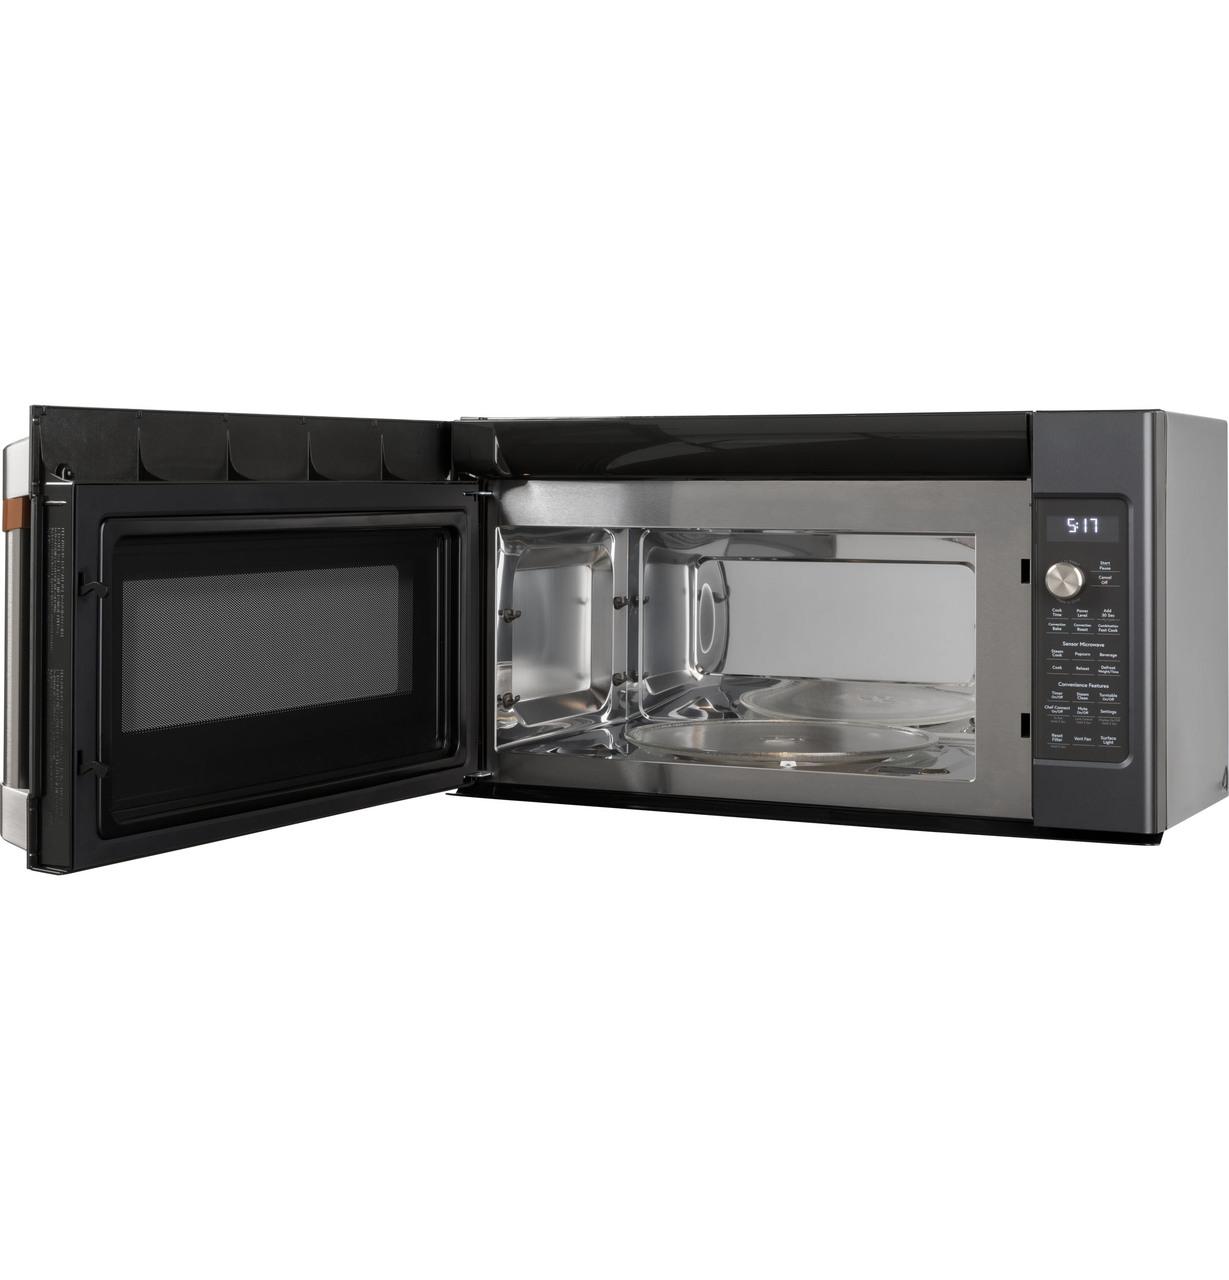 Caf(eback)™ 1.7 Cu. Ft. Convection Over-the-Range Microwave Oven